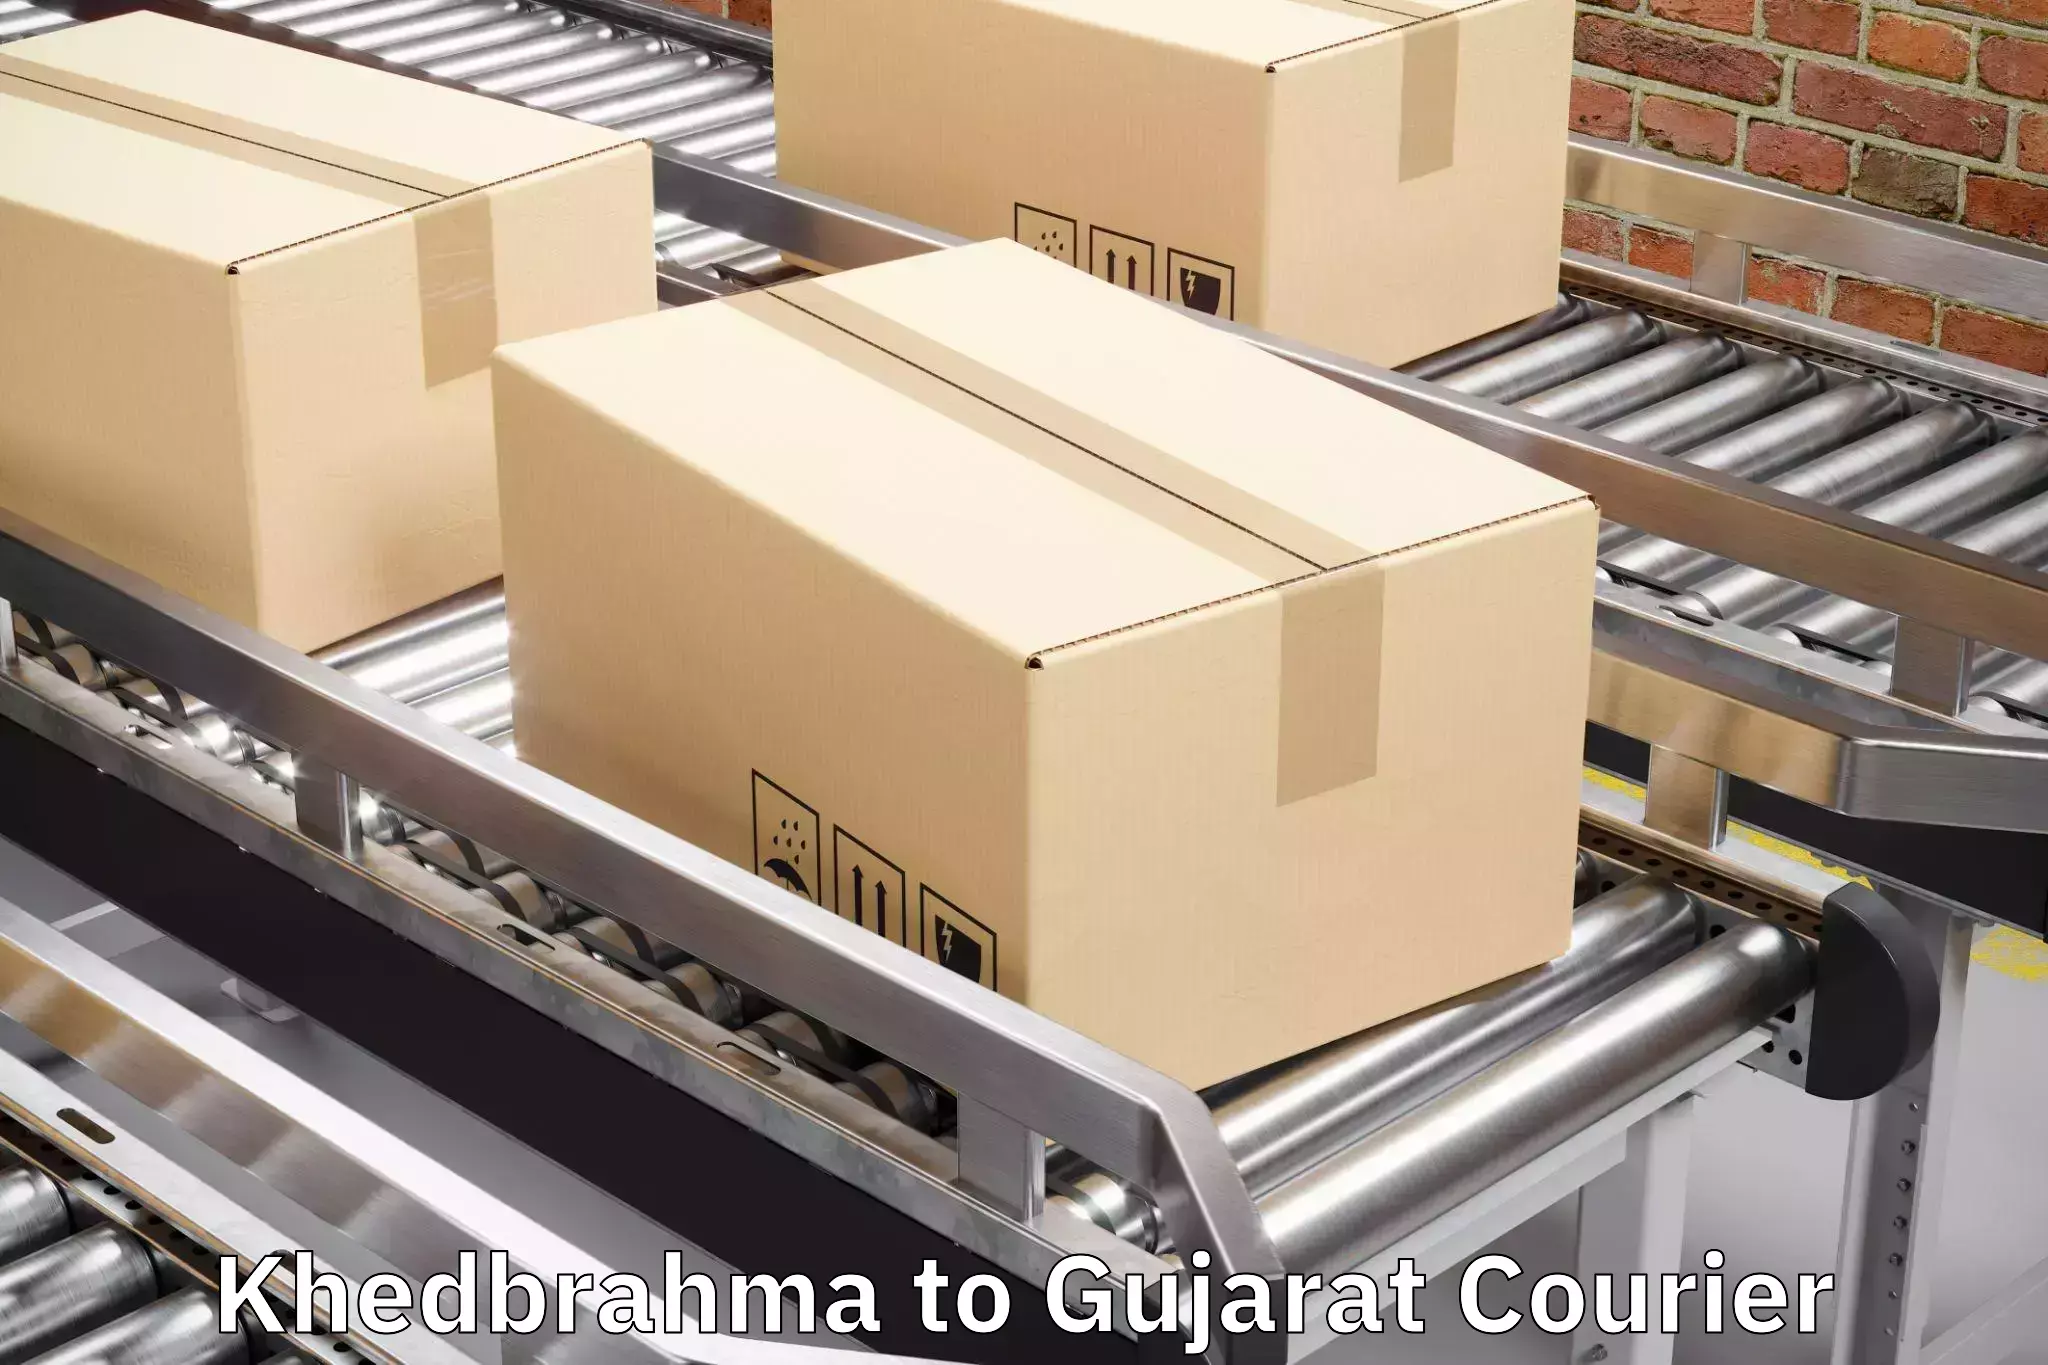 Instant baggage transport quote Khedbrahma to Morbi